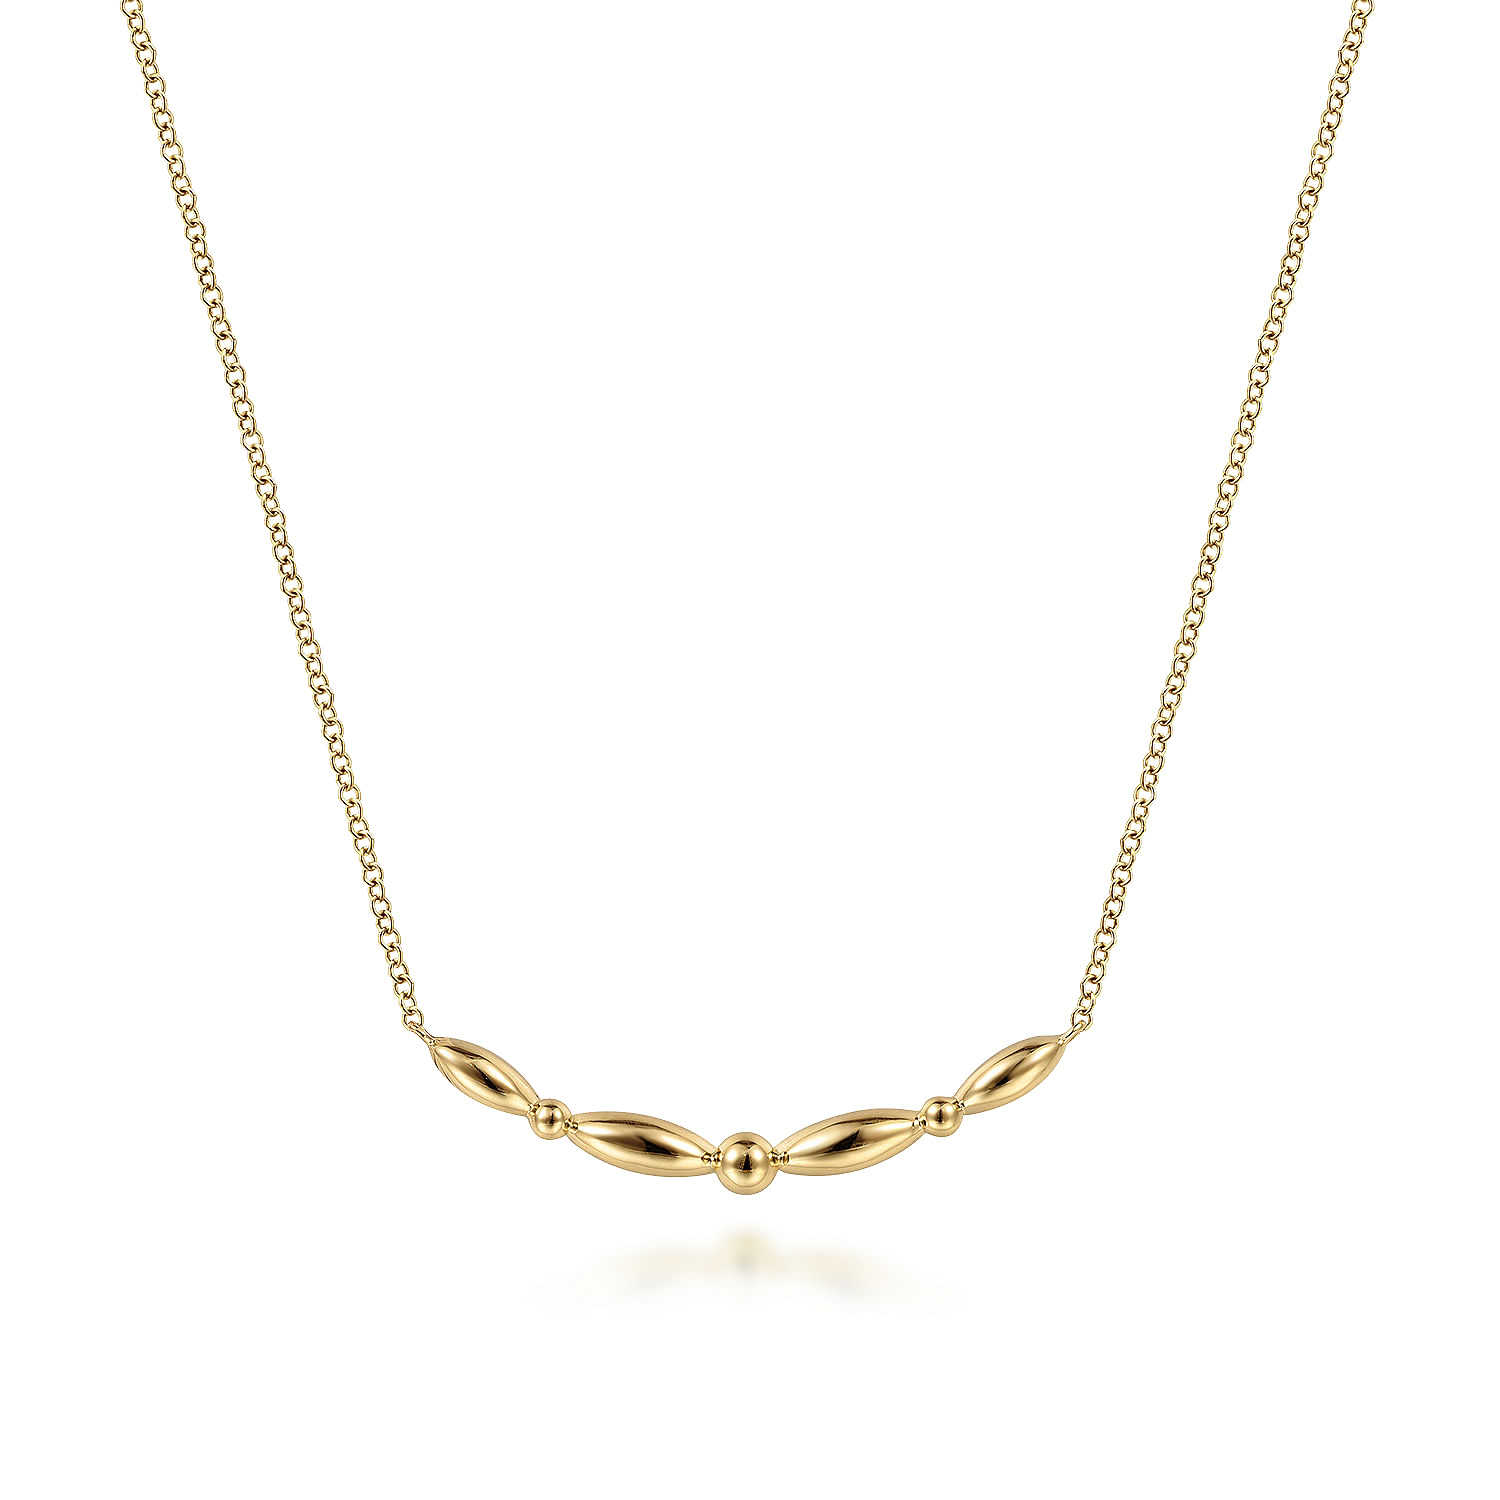 14K Yellow Gold Beaded Curved Bar Necklace